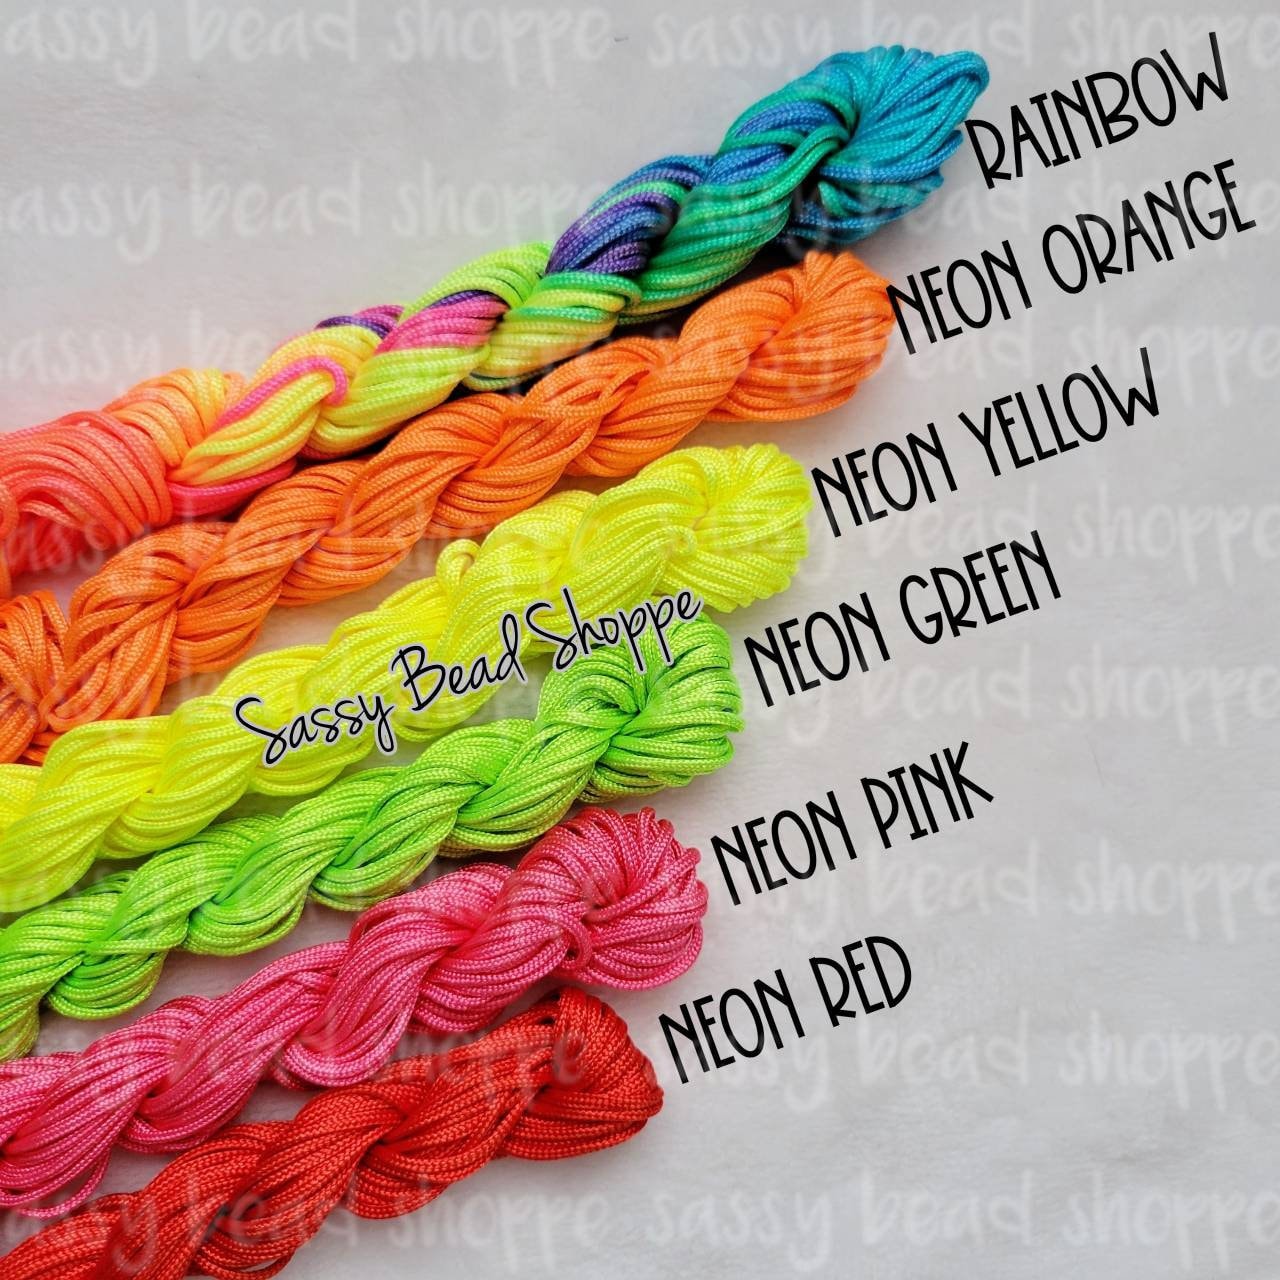 13 Yards of Nylon Cord, 2mm Multiple Neon Color Options – Sassy Bead Shoppe